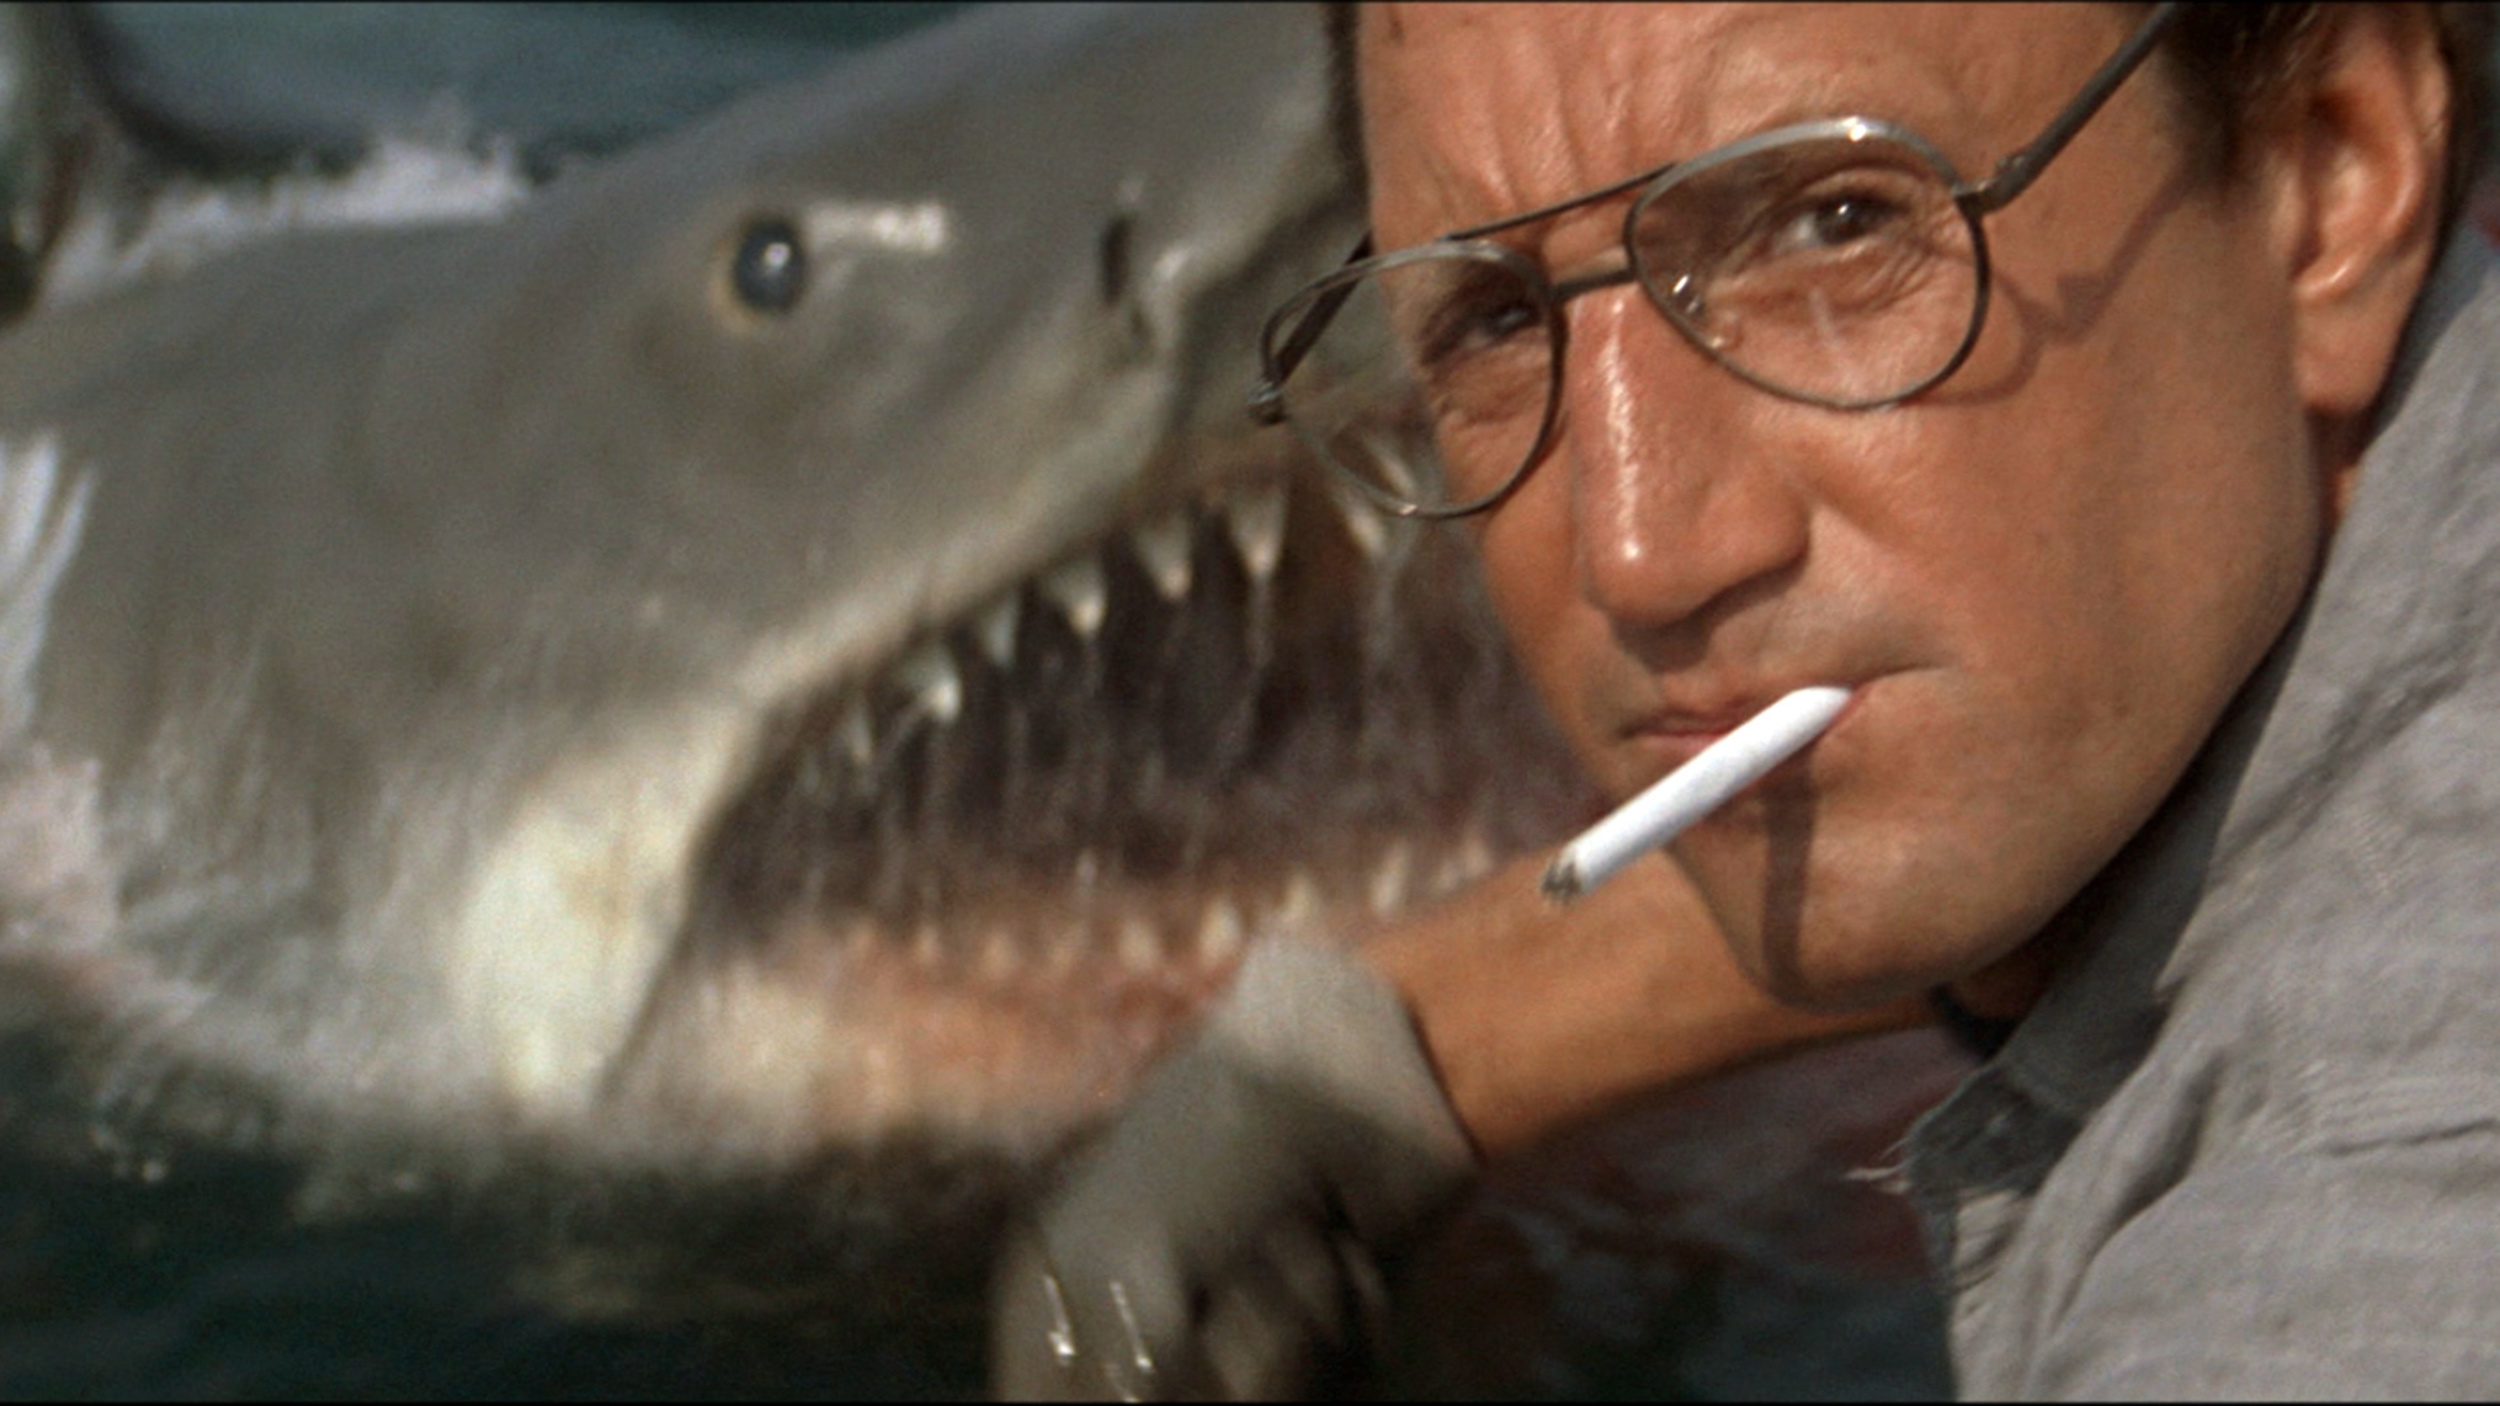 <p>When a franchise’s first installment happens to be one of the greatest films ever made, you can follow it up with nothing but dreck and it’ll still make this list. It’s close, but “Jaws 2” retains enough of the original’s Spielbergian charm (and, most importantly, cast) that you excuse its narrative contrivances. “Jaws 3-D” features Dennis Quaid, Lea Thompson and a post-Oscar Louis Gossett Jr., but the promise of a gargantuan great white terrorizing a water park is largely squandered. “Jaws: The Revenge” posits that an entire species of shark has it out for the Brody family but doesn’t get nearly bonkers enough. It’s merely atrocious, though <a href="https://www.youtube.com/watch?v=Ek2EAJInAco" rel="noopener noreferrer">the alternate opening is <em>very special</em></a>.</p>